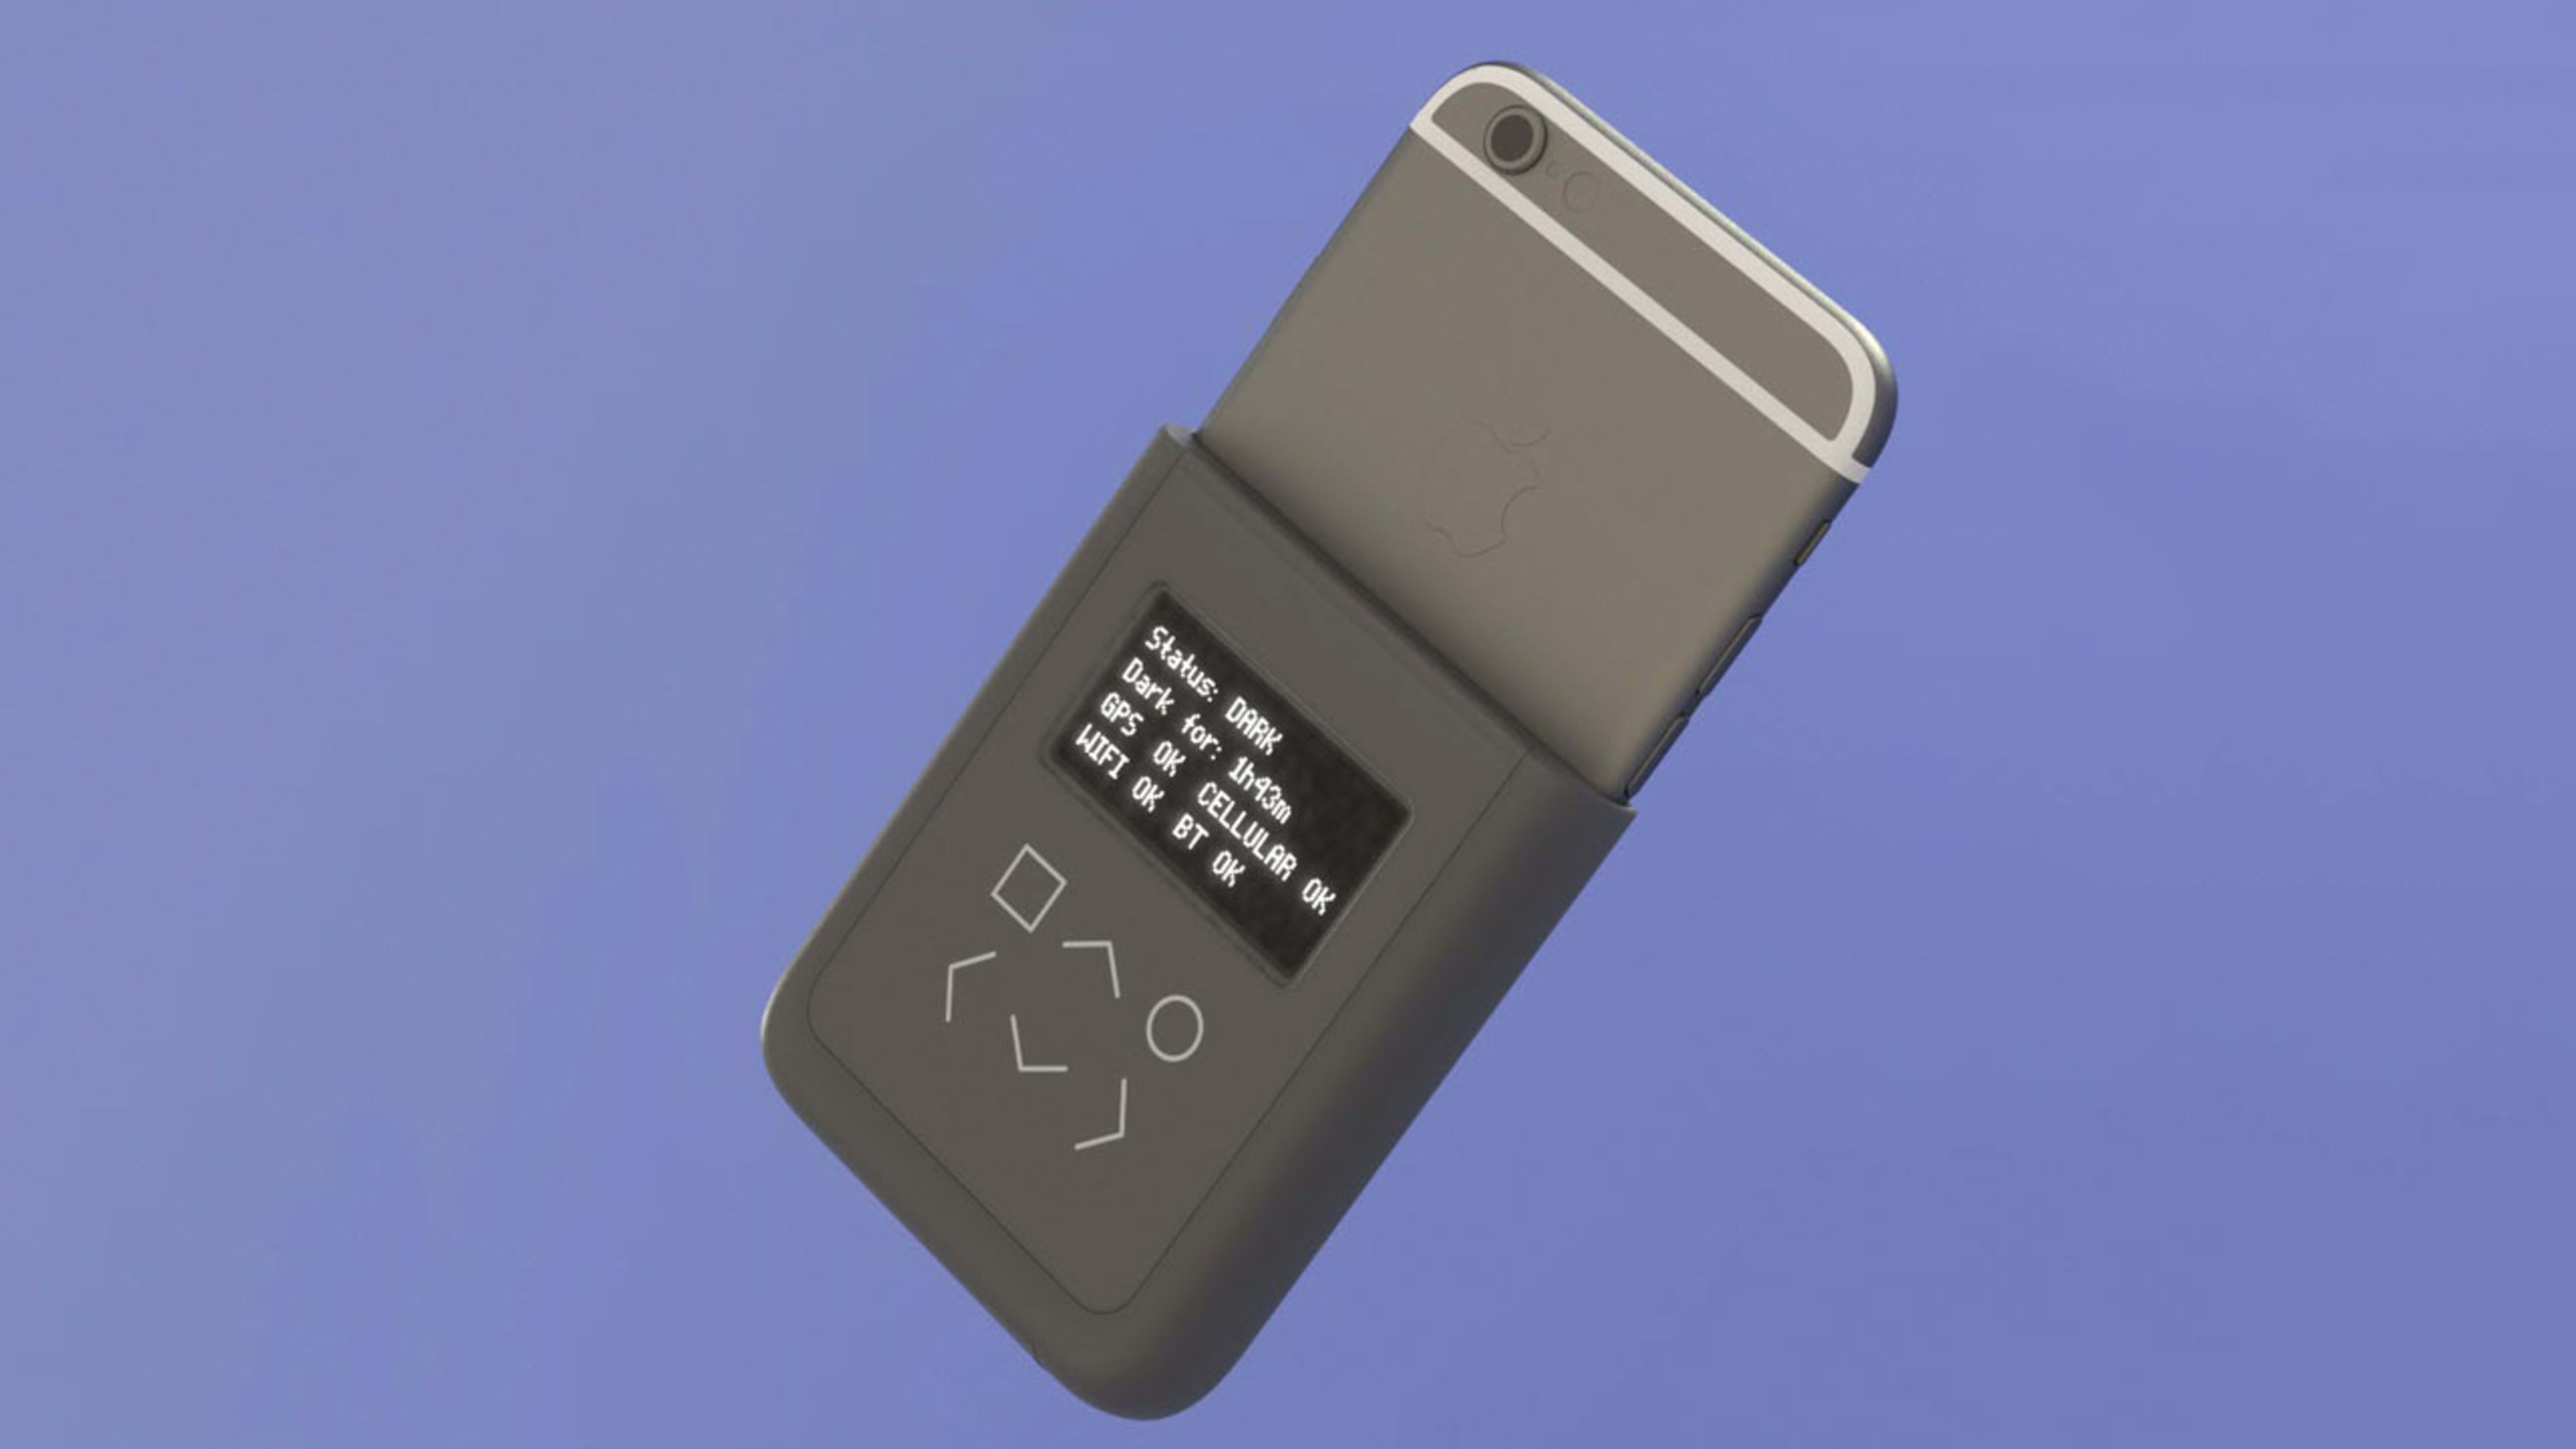 Edward Snowden And Bunnie Huang Built A Privacy Add-On For The iPhone